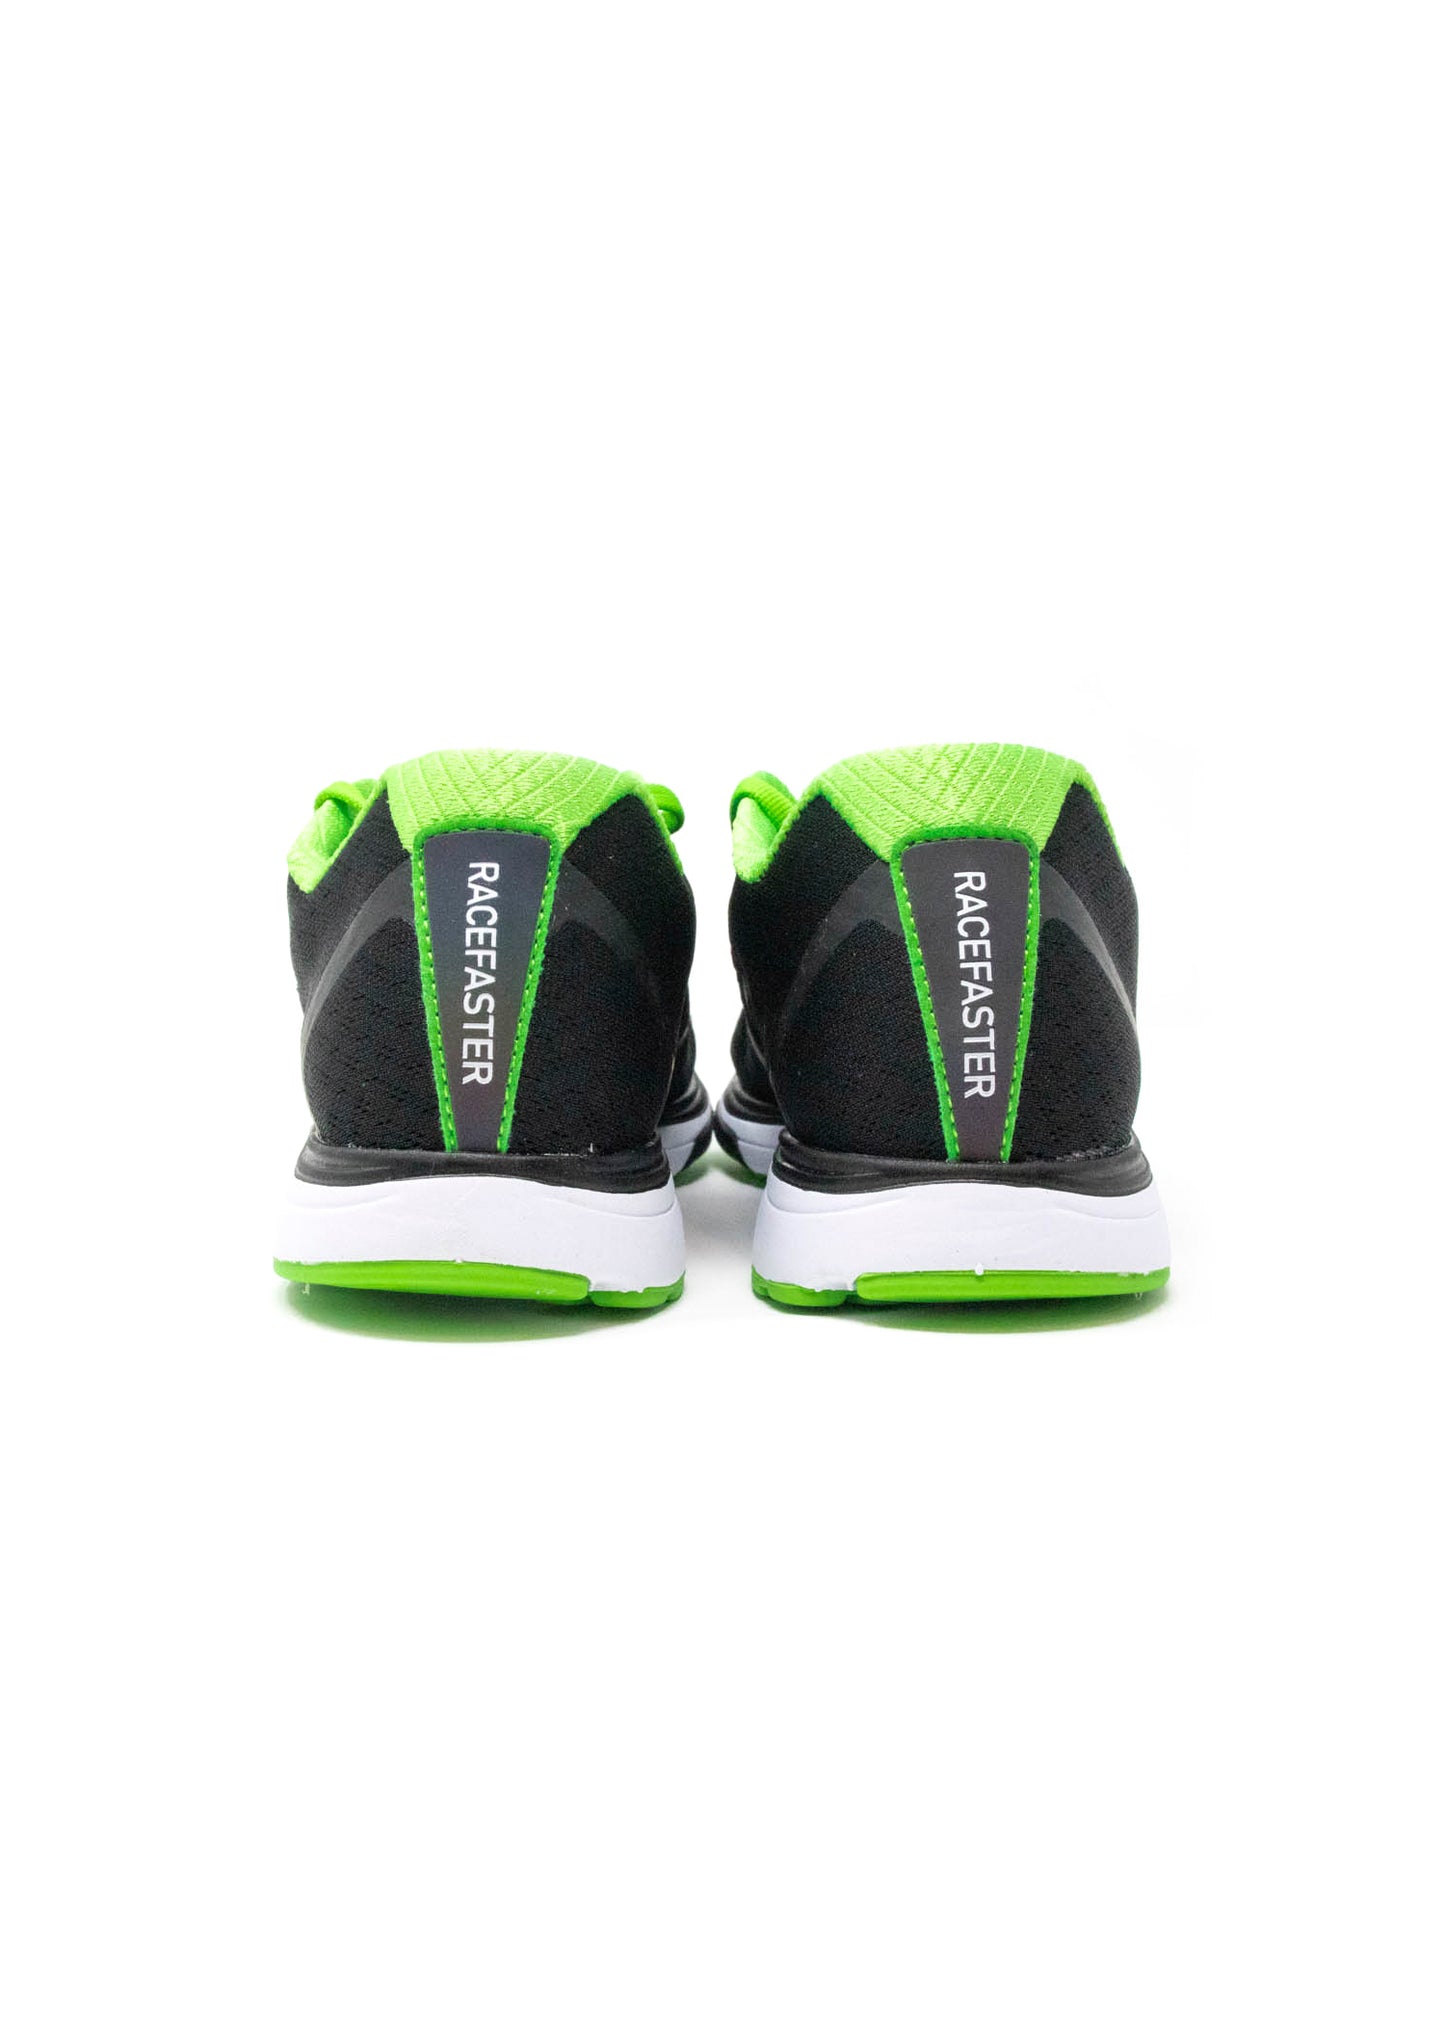 Racefaster FloatHeights - Black/Lime